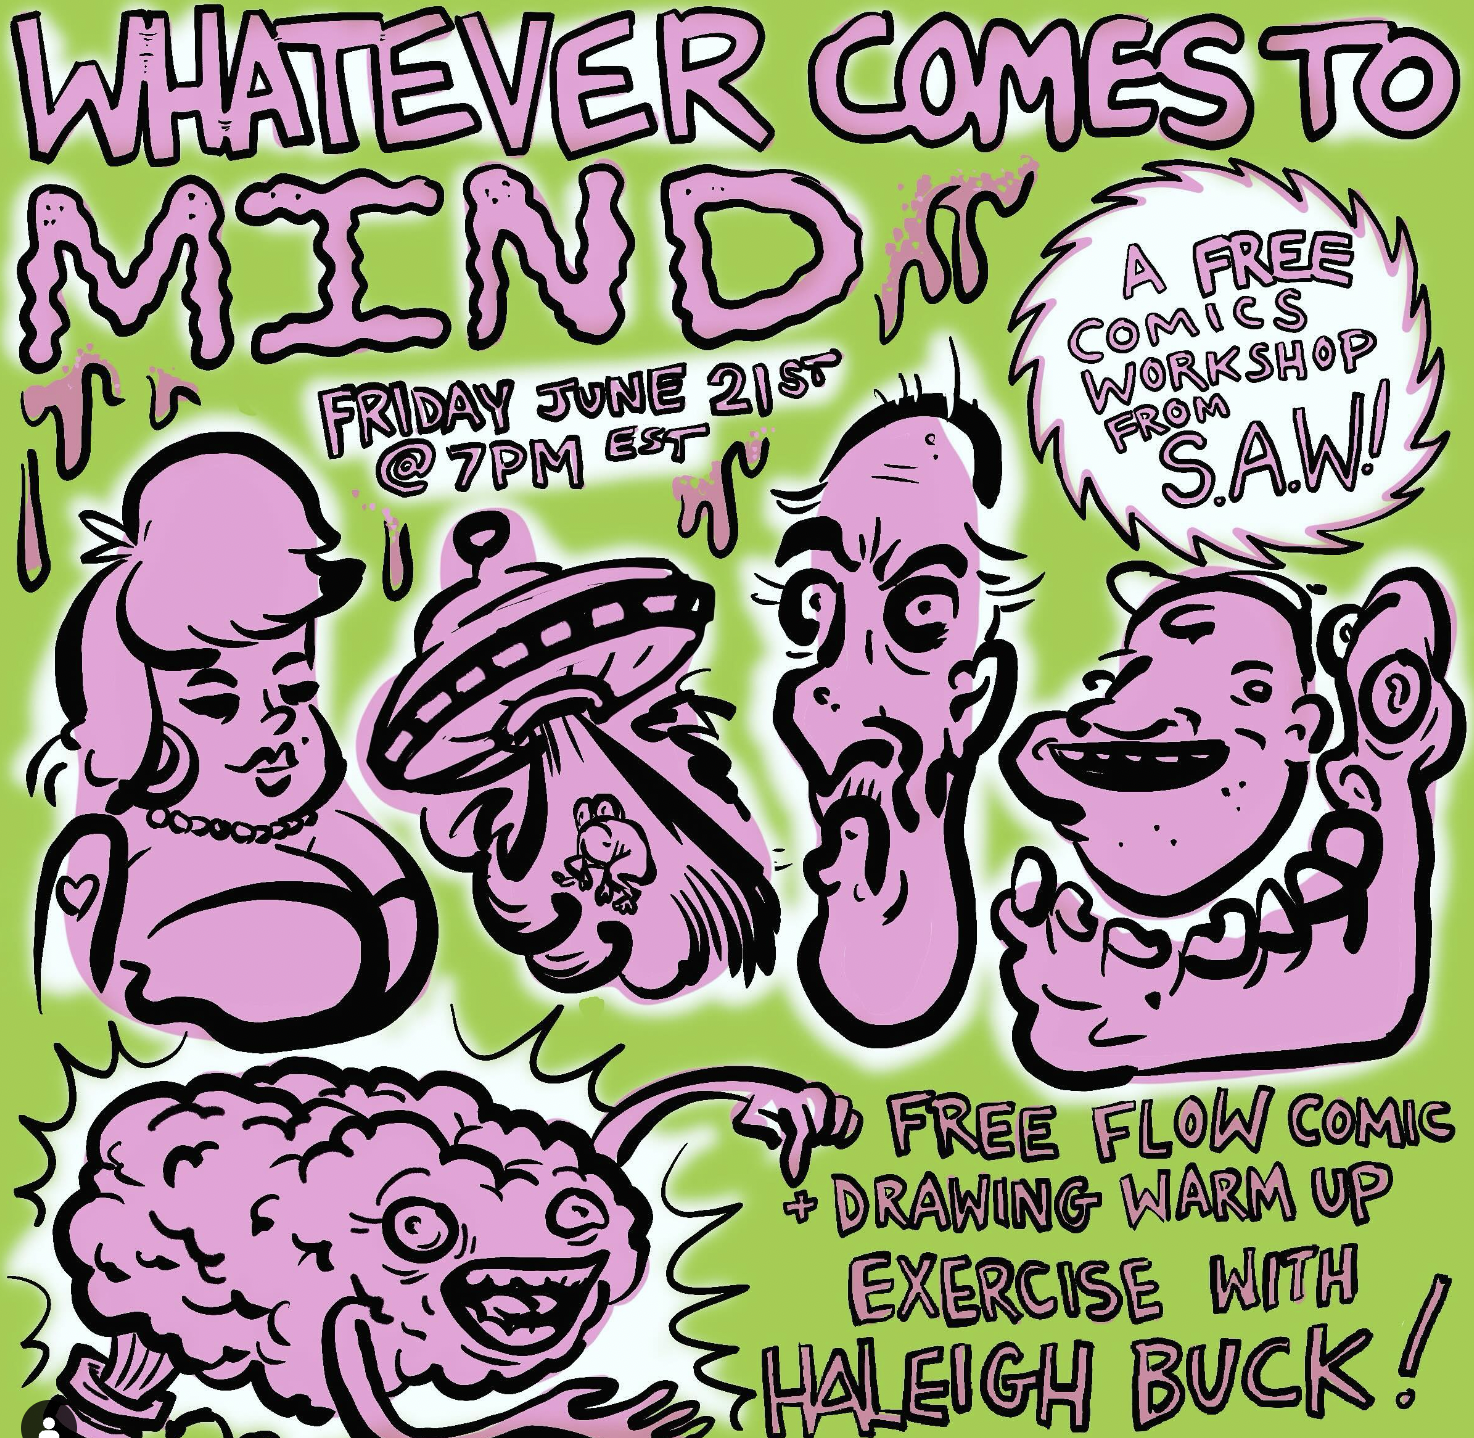 "Whatever Comes to Mind, Friday June 21st @ 7pm EDT, Free flow comic + drawing warmup exercise with Haleigh Buck! A free comics workshop from SAW!"